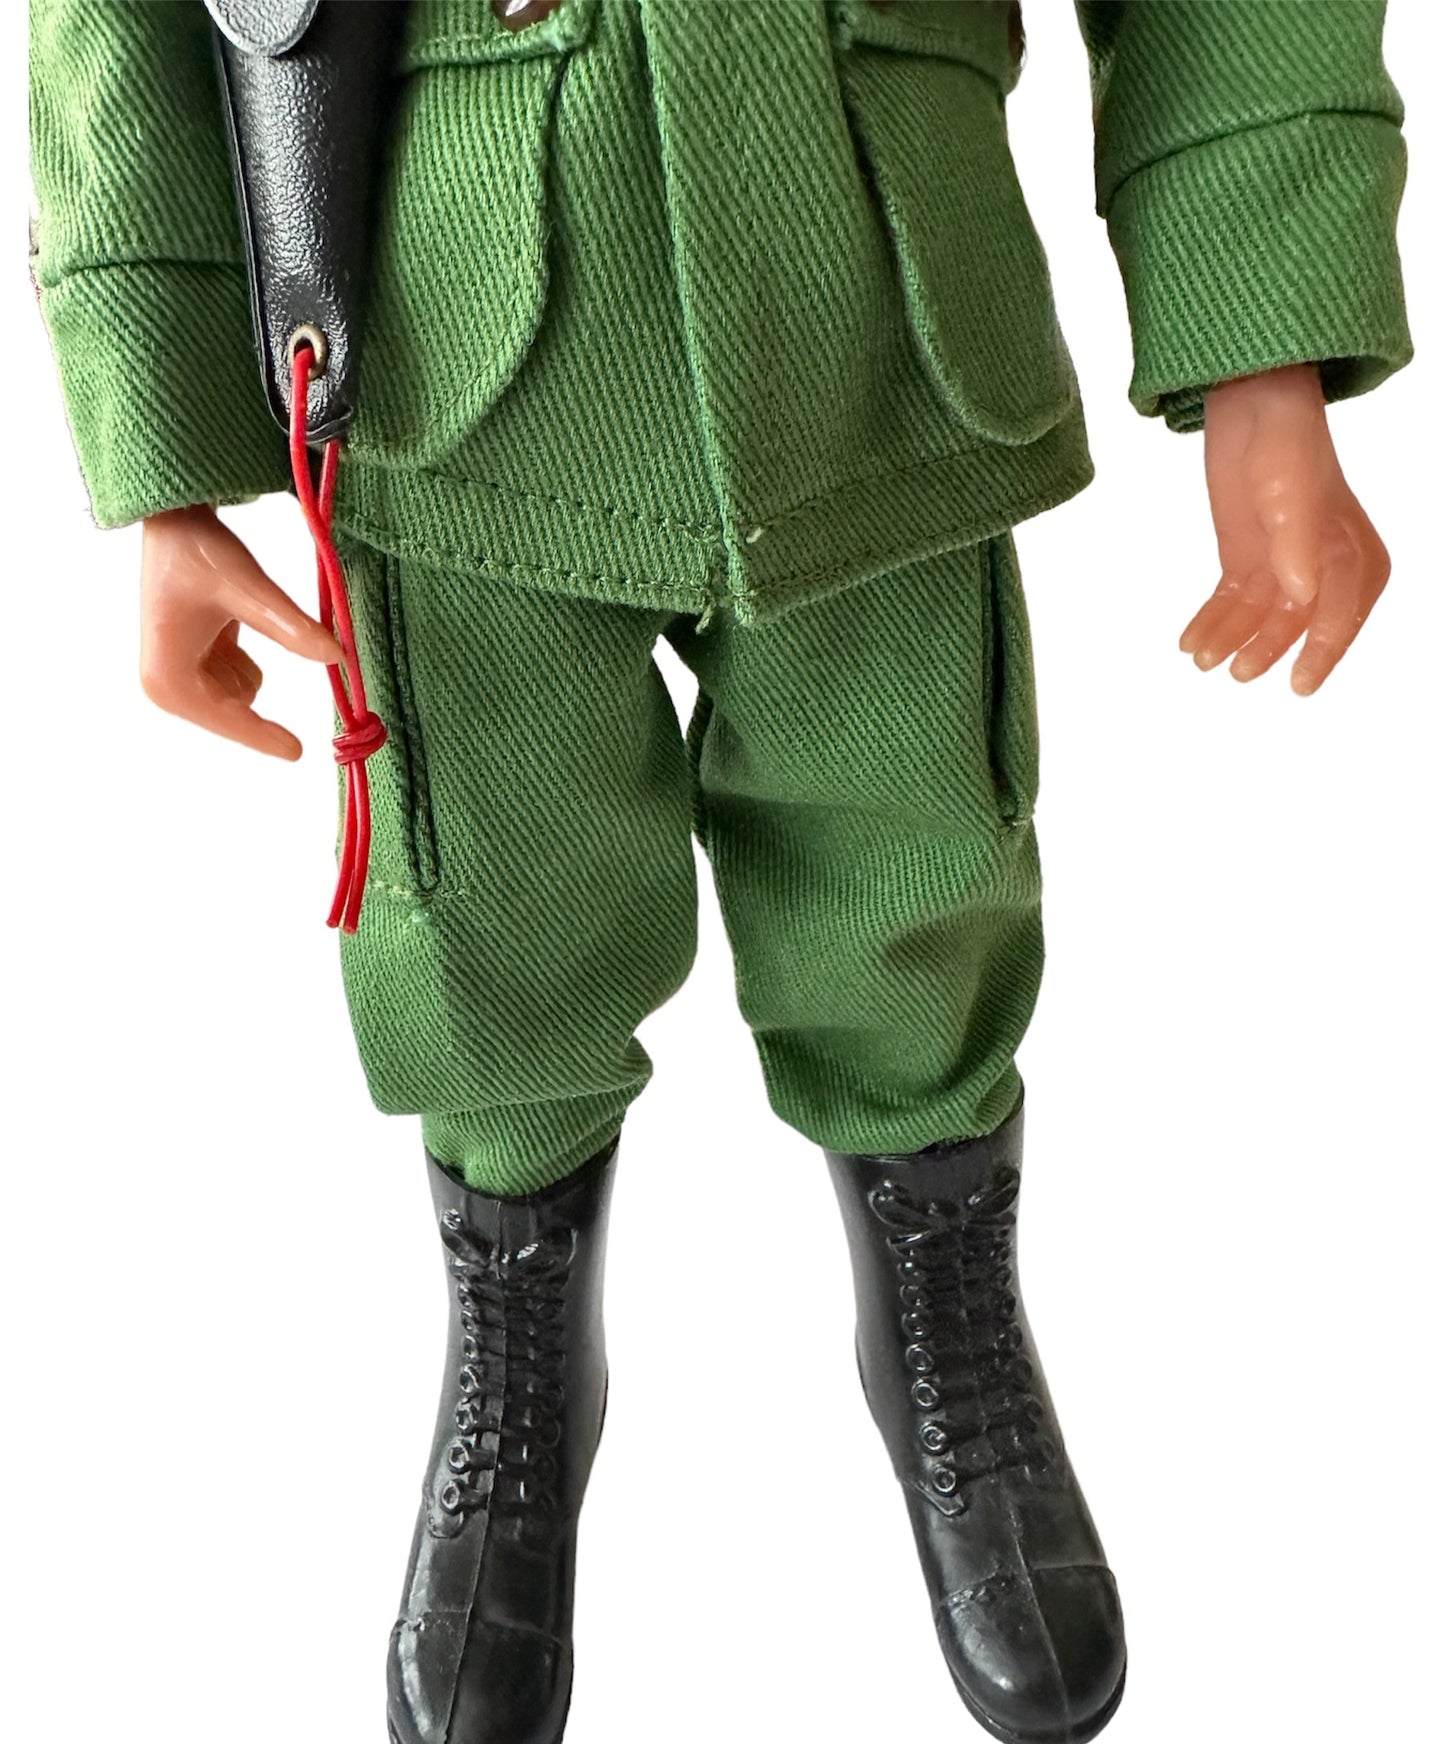 Vintage 2006 Action Man 40th Anniversary - Green Beret Action Soldier 12 Inch Action Figure With Black Painted Hair -  In The Original Box - Brand New Shop Stock Room Find